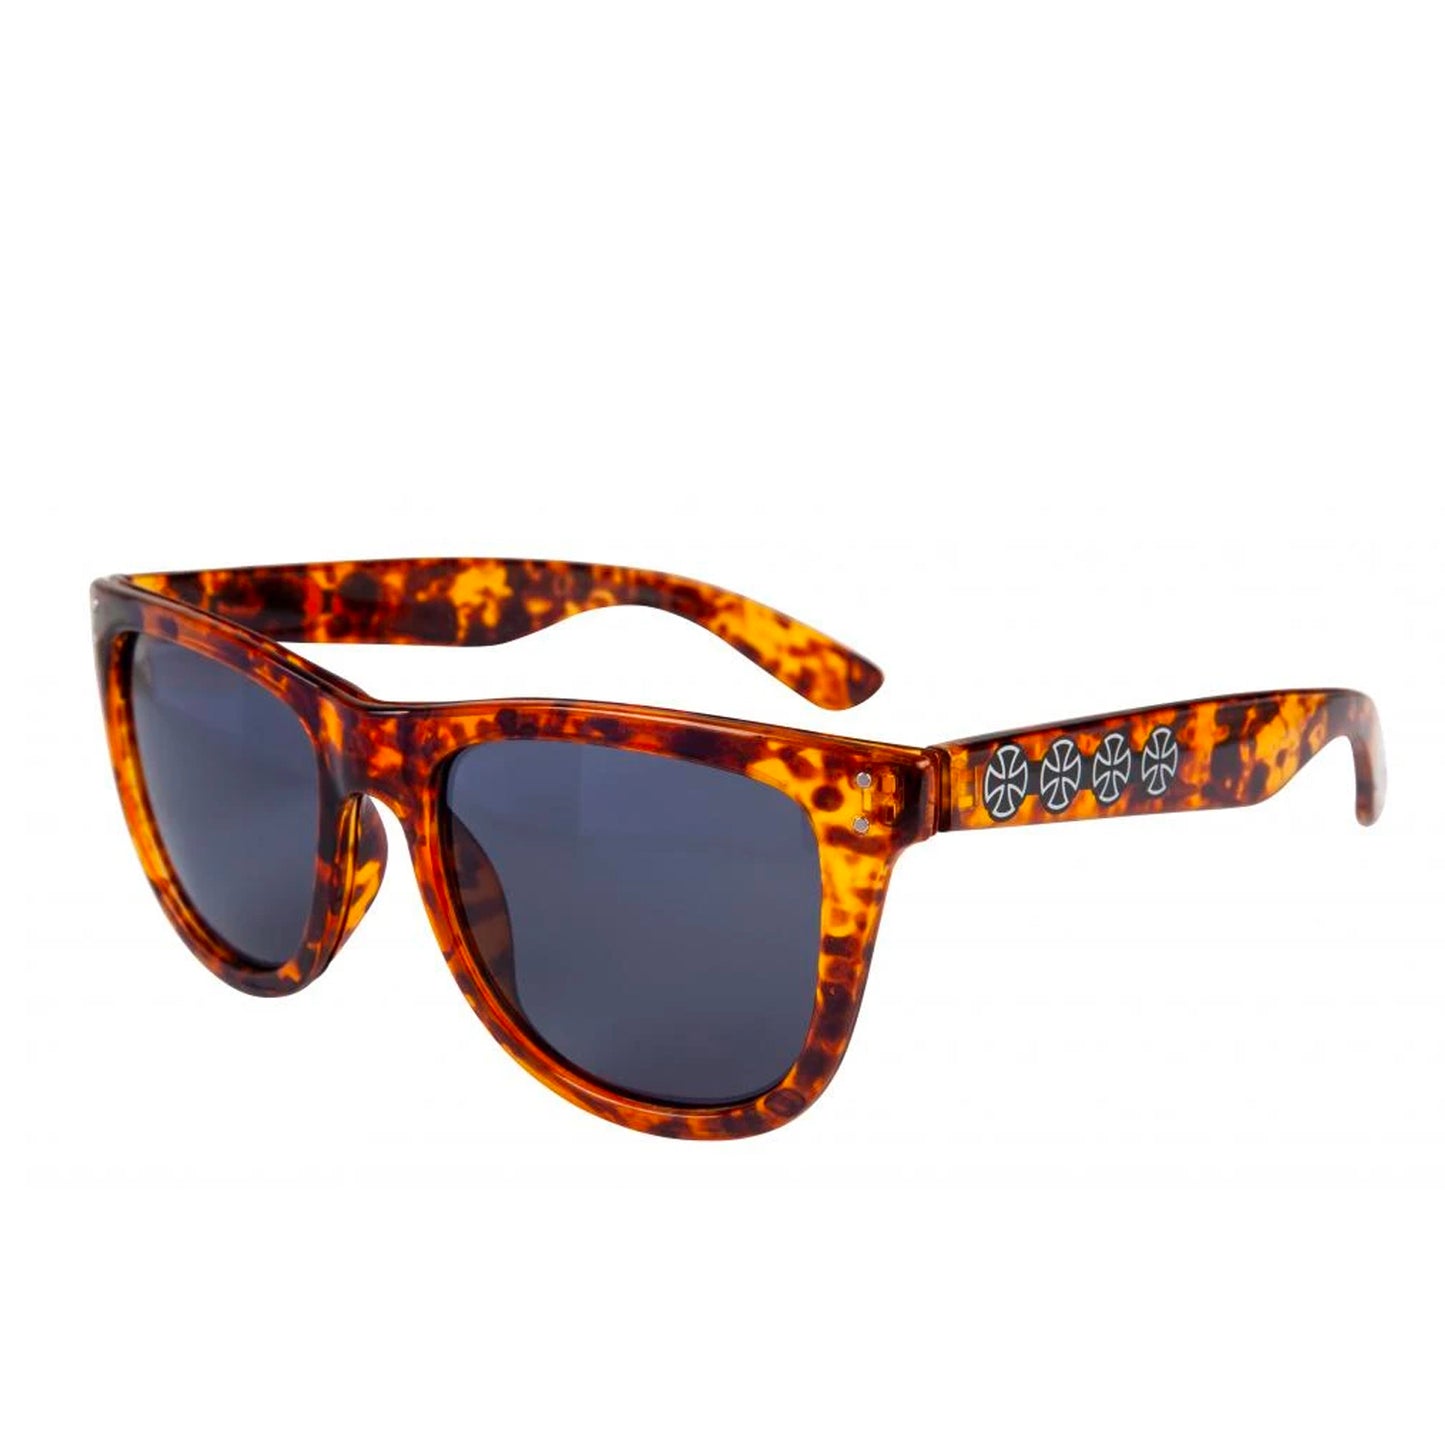 Independent Manner Sunglasses - Tortoise Shell - Prime Delux Store